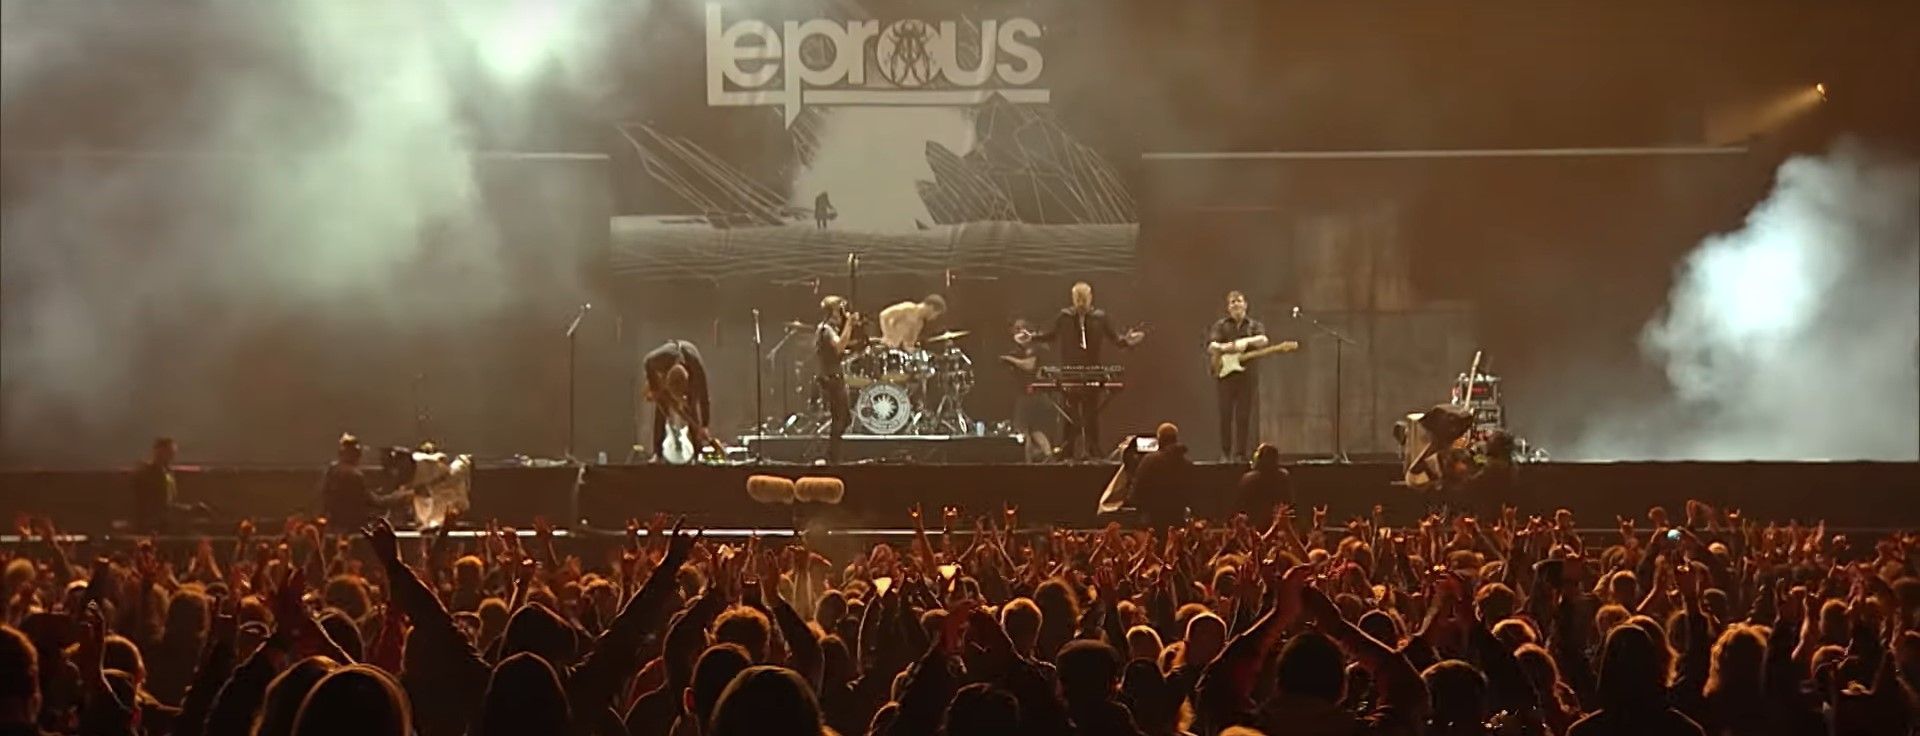 Leprous - Live In Germany 2019 (Full)